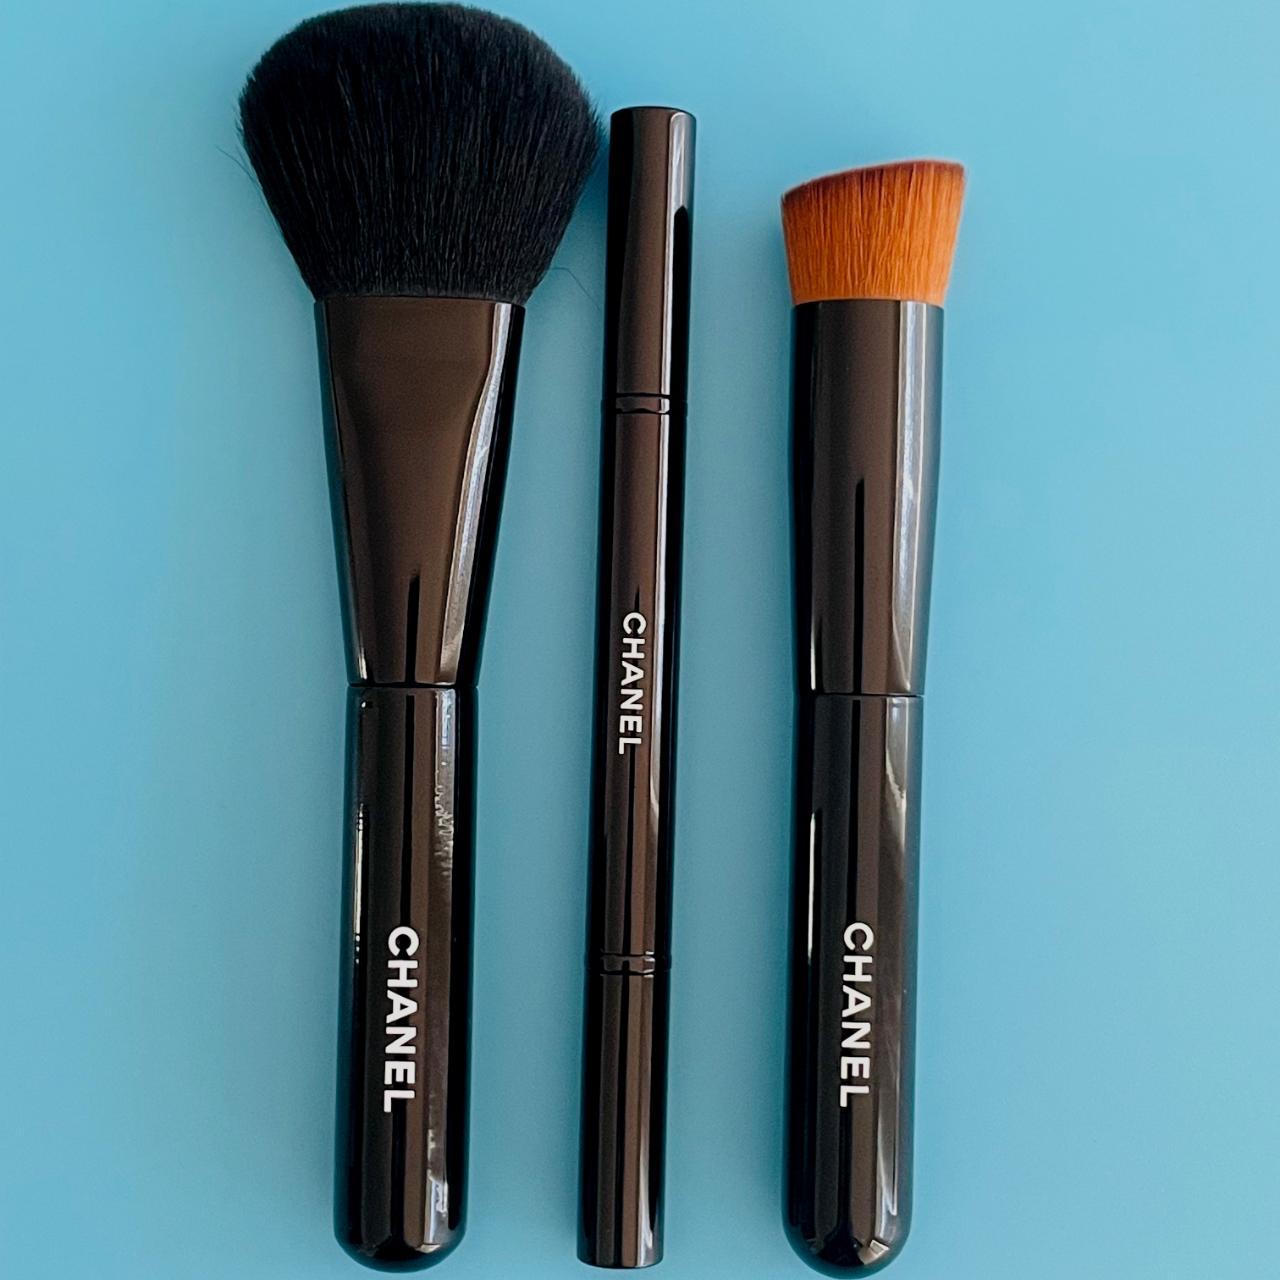 CHANEL Collection of 3 Essential Brushes The 2-in-1 - Depop